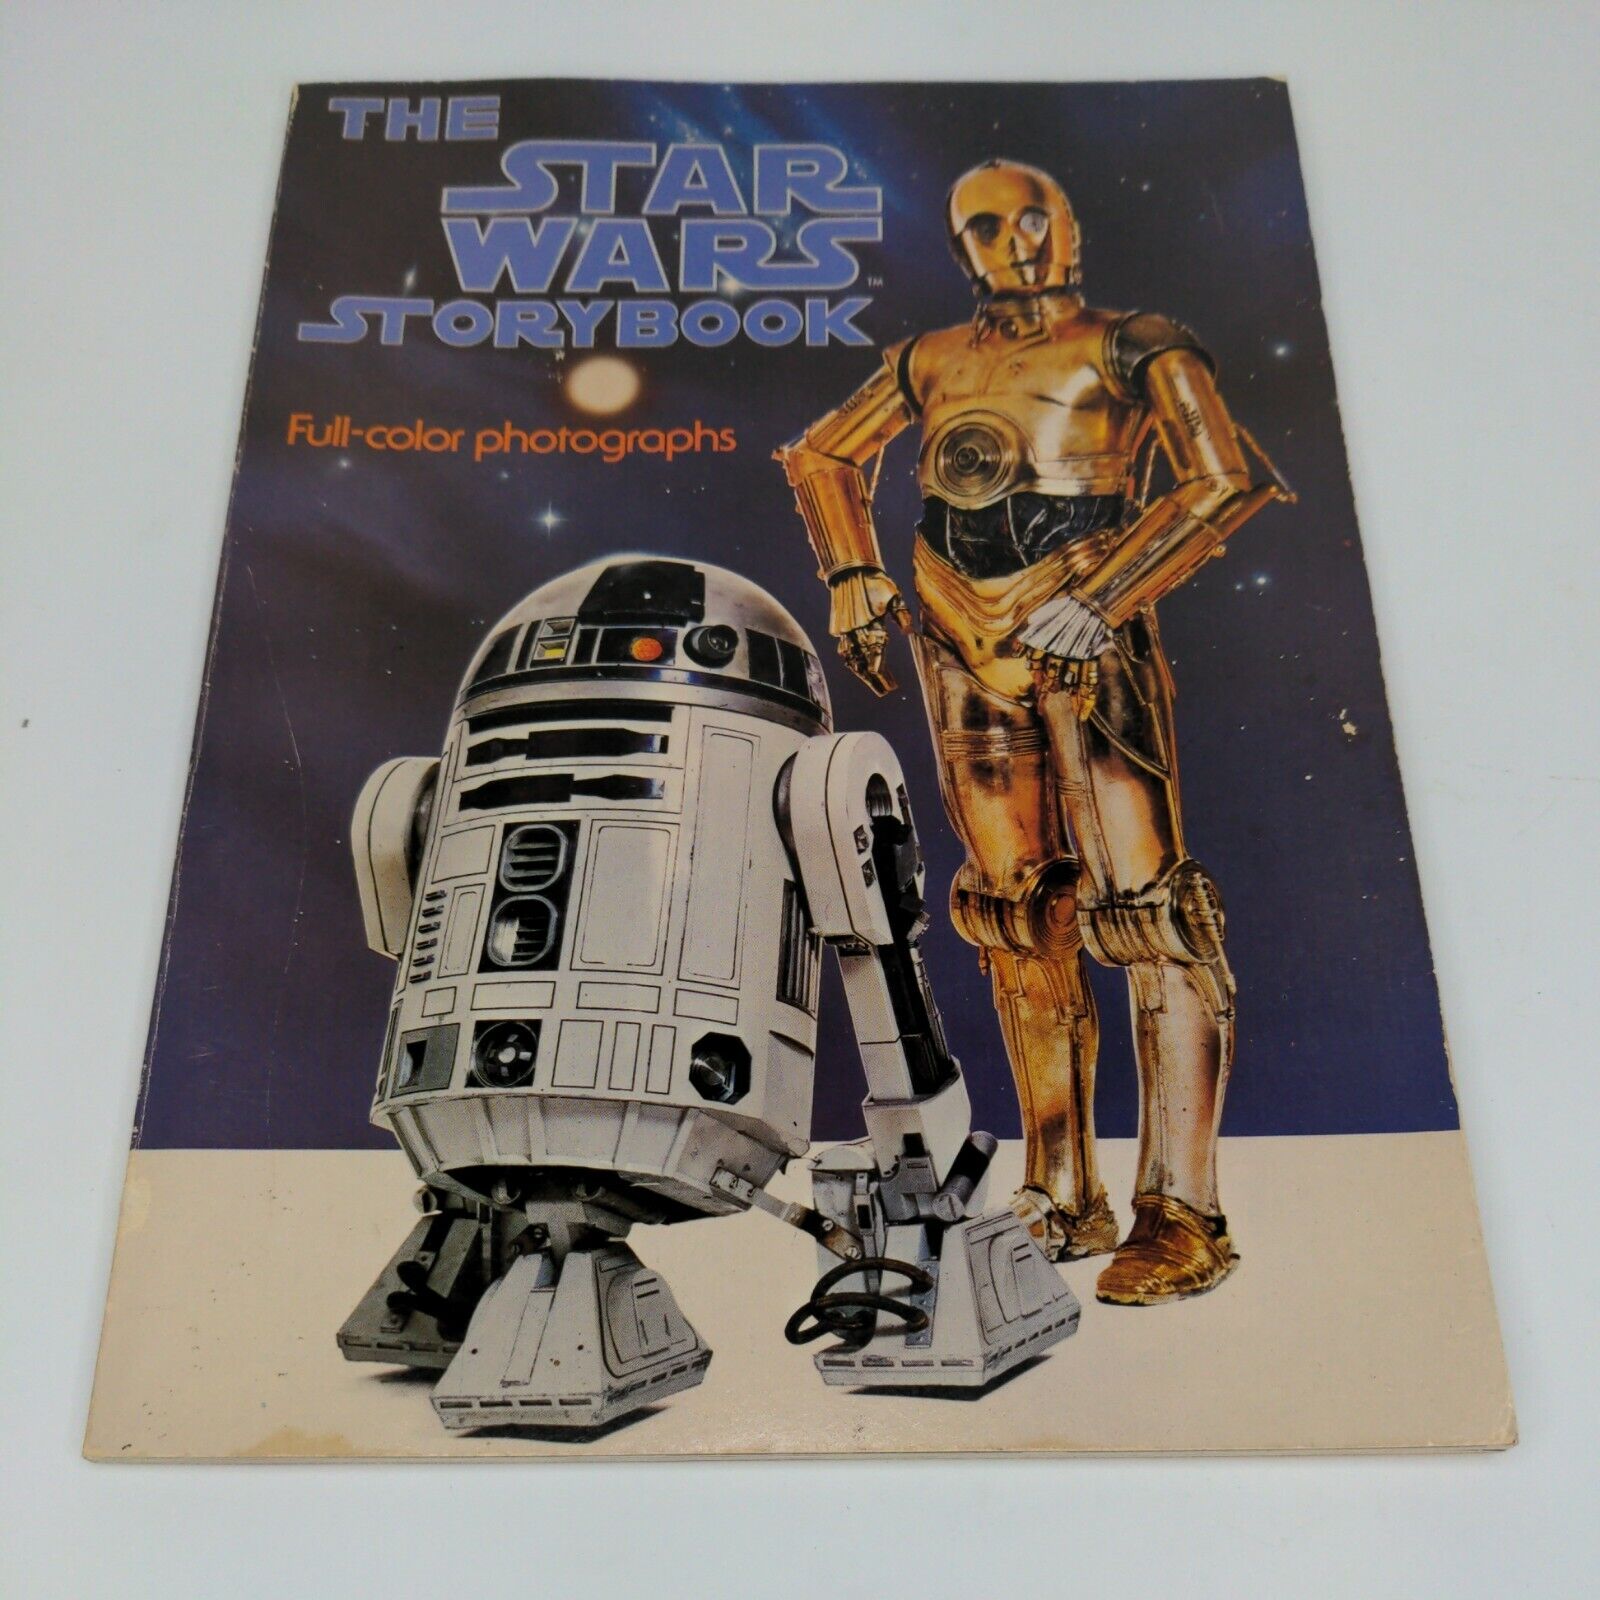 The Star Wars Storybook - Scholastic Book Services - TV 4466 - Full Color Photos